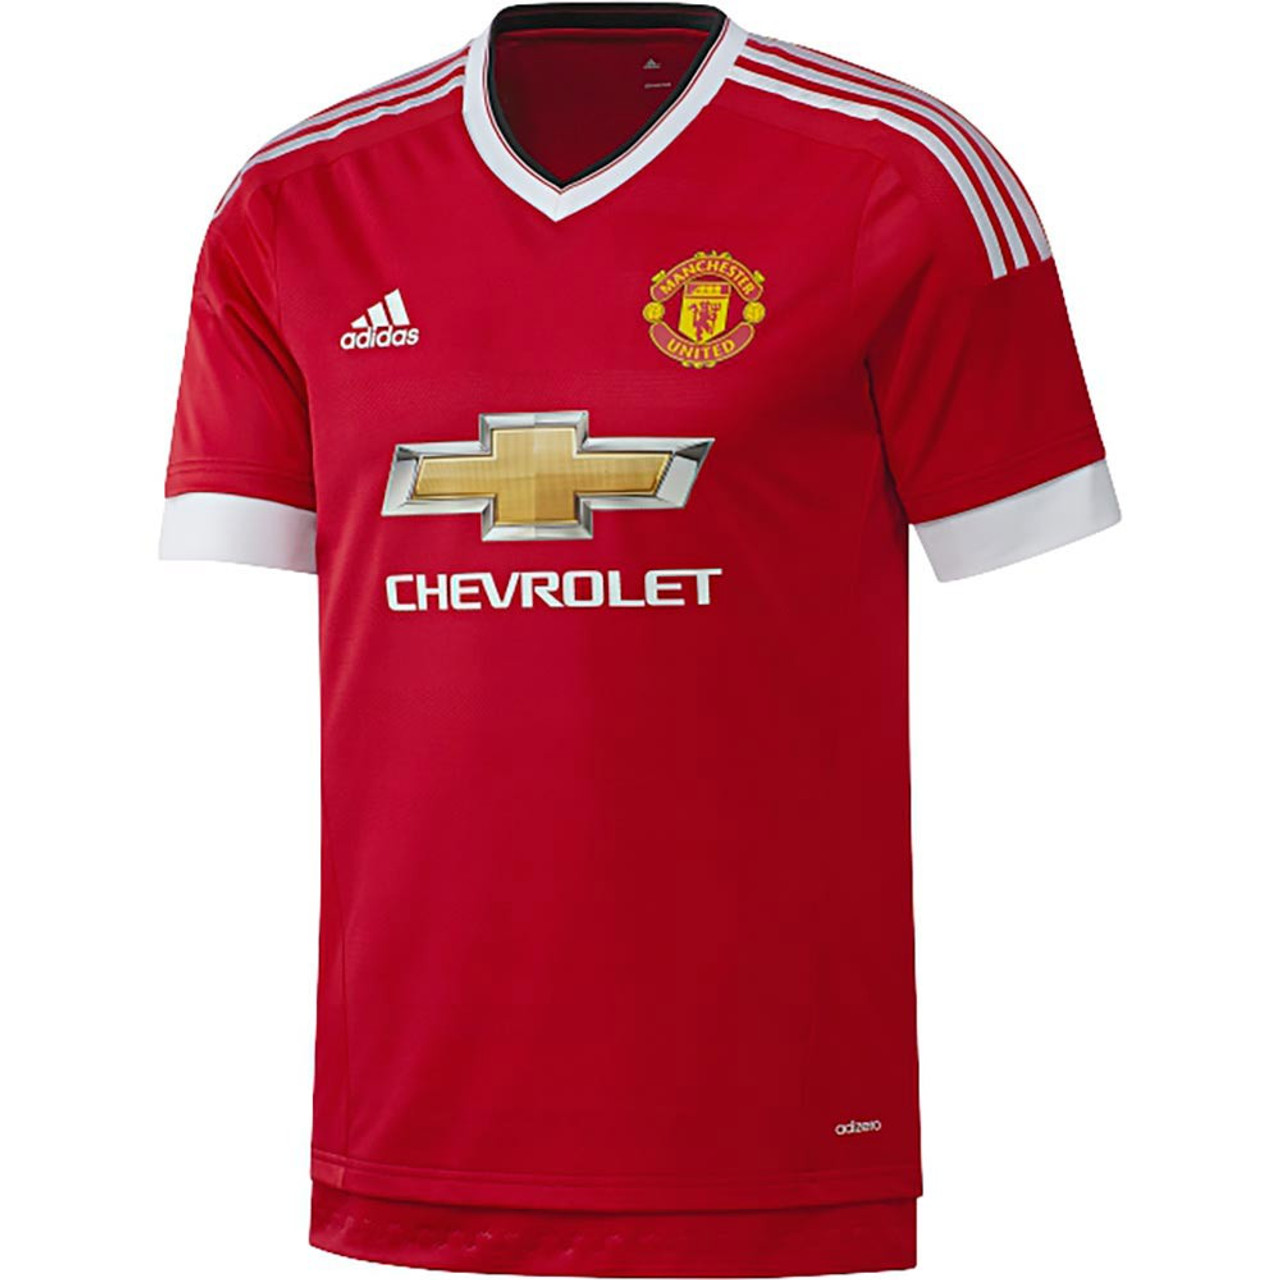 jersey manchester united 2016